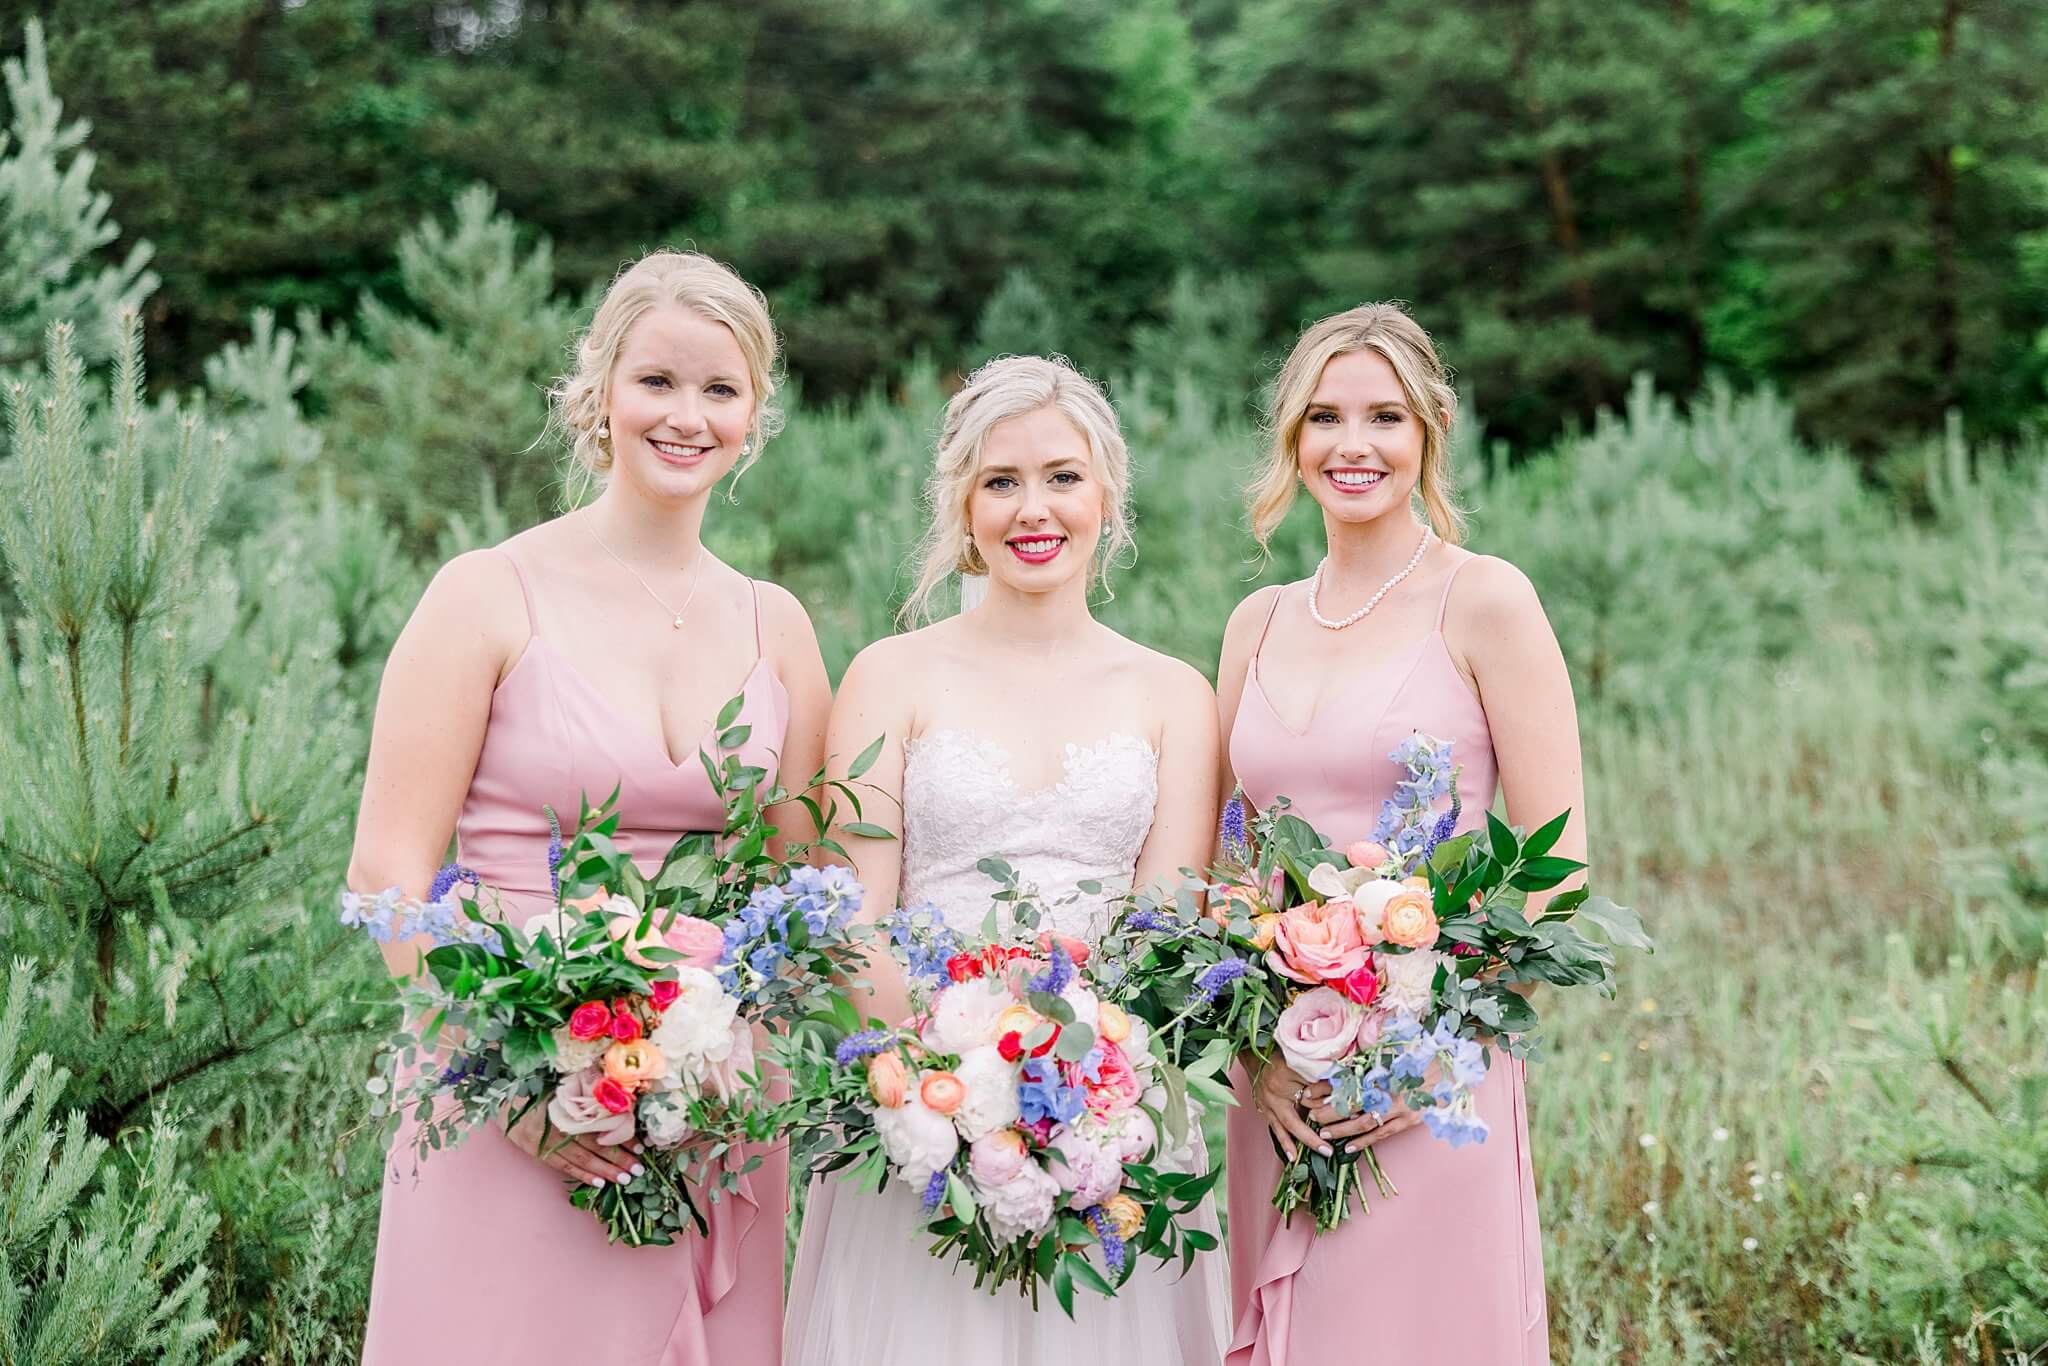 Traverse City bride posing with her bridesmaids and their bold, colorful wedding florals.